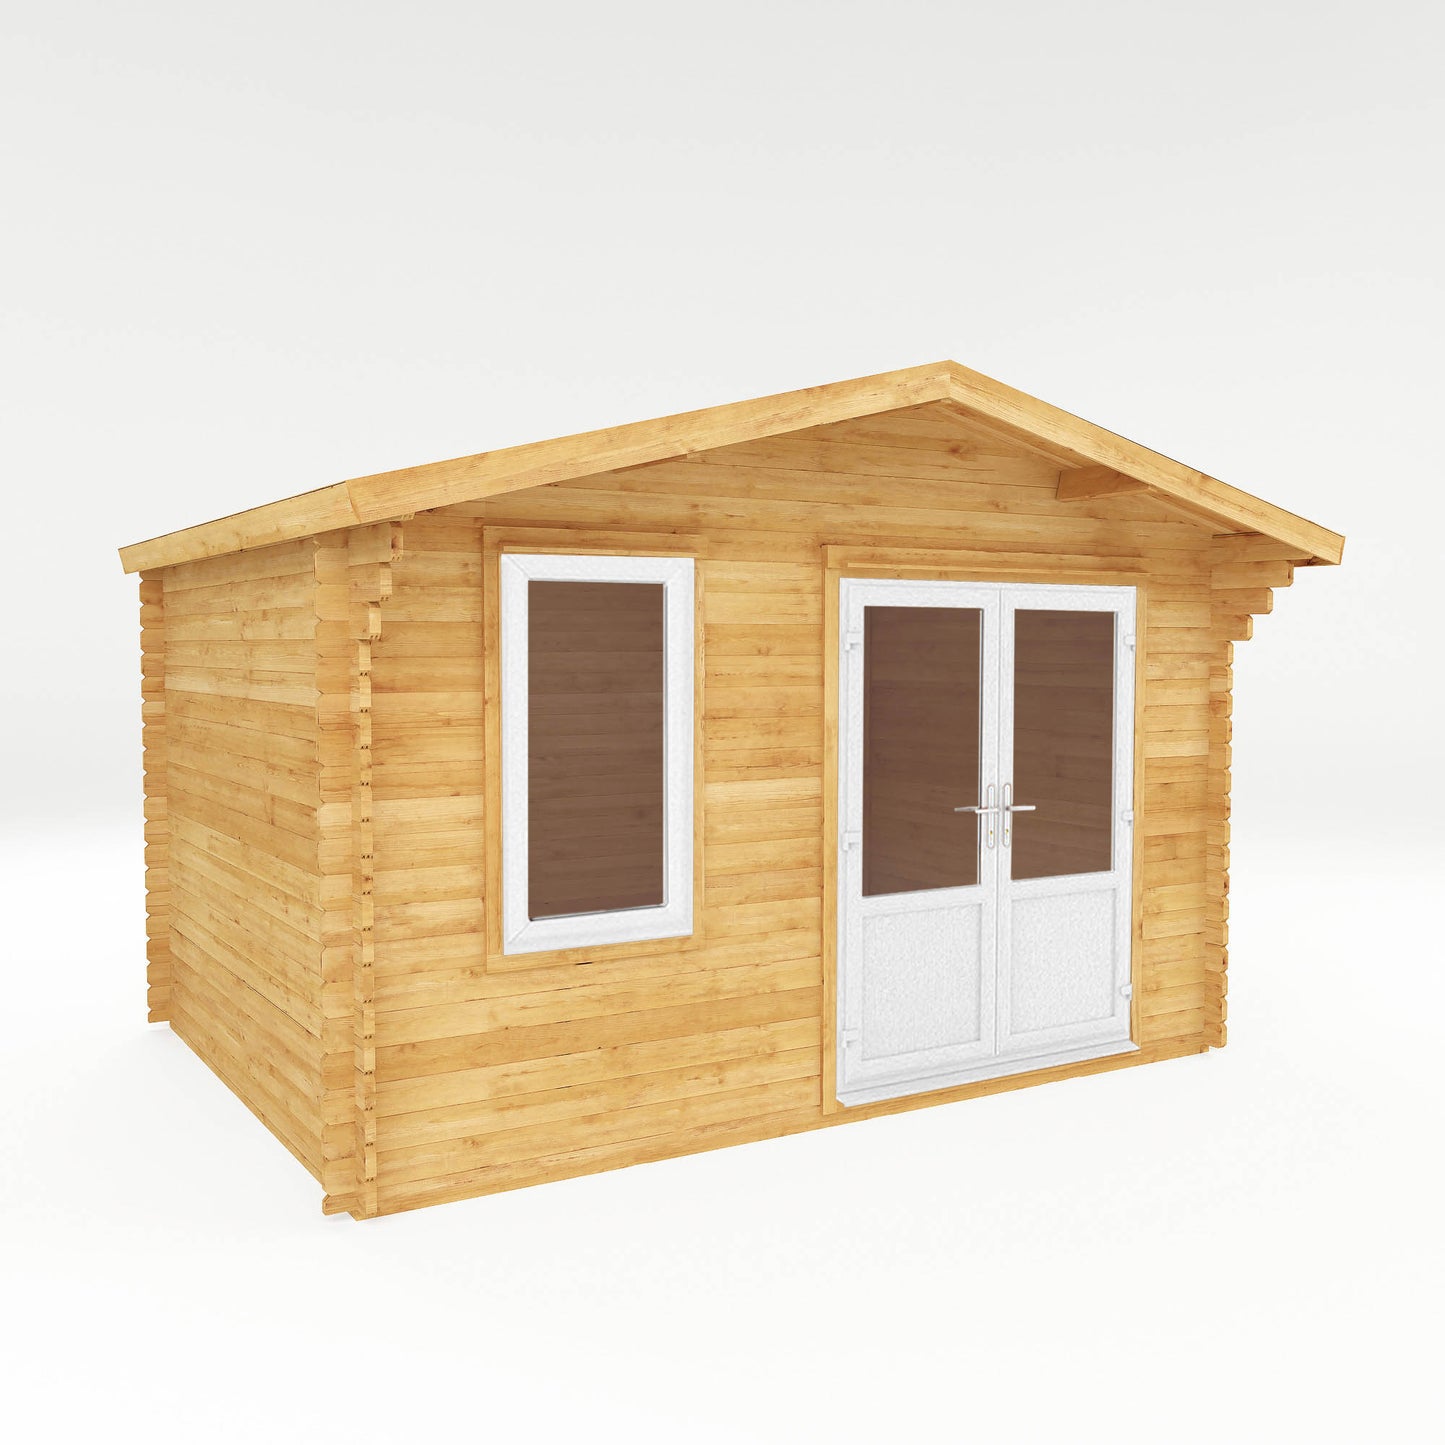 The 4m x 3m Sparrow Log Cabin with White UPVC